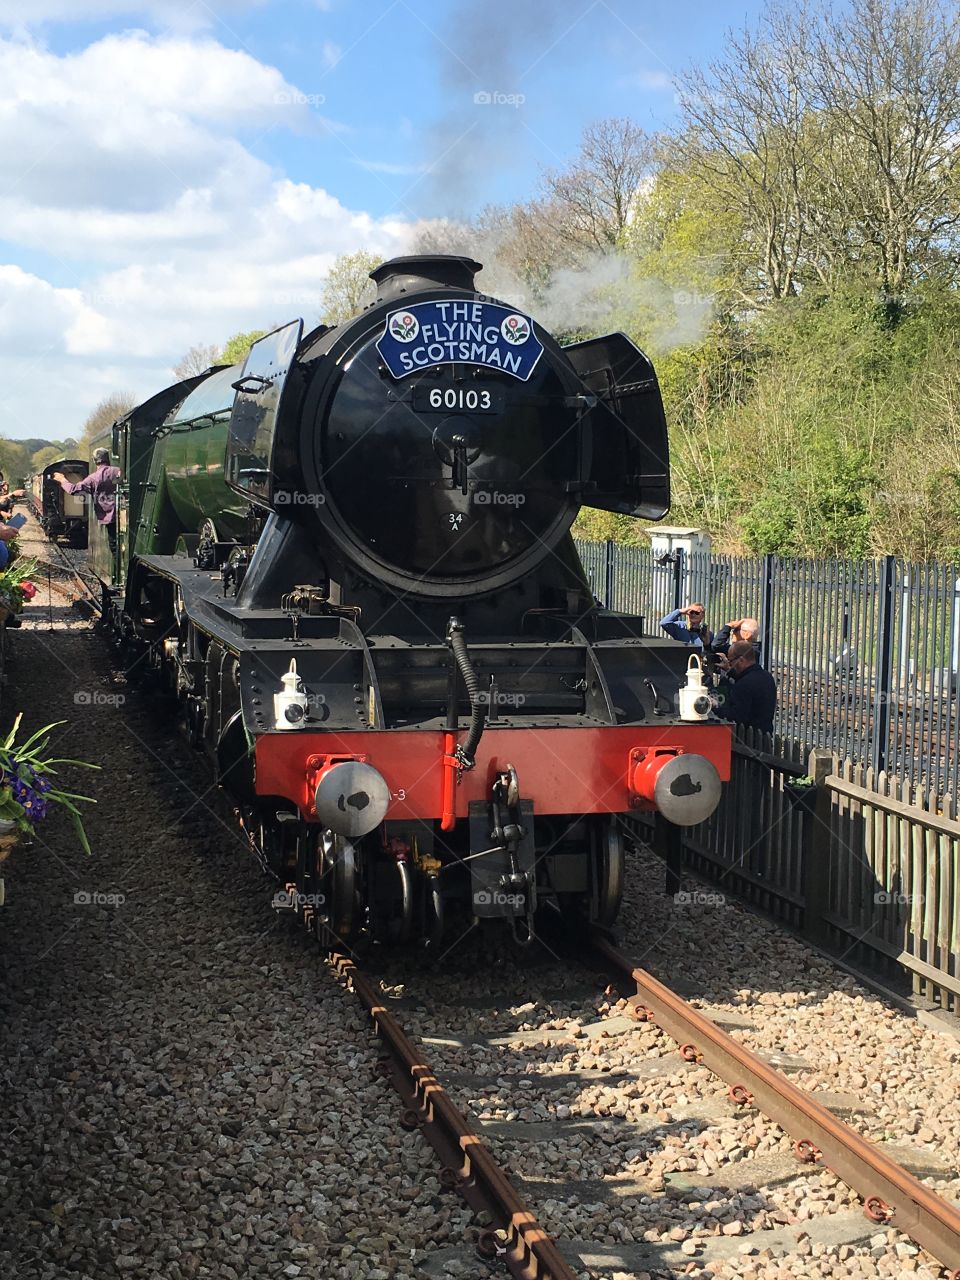 Flying Scotsman 60103 at east grinstead station on the bluebell railway 19/04/2017